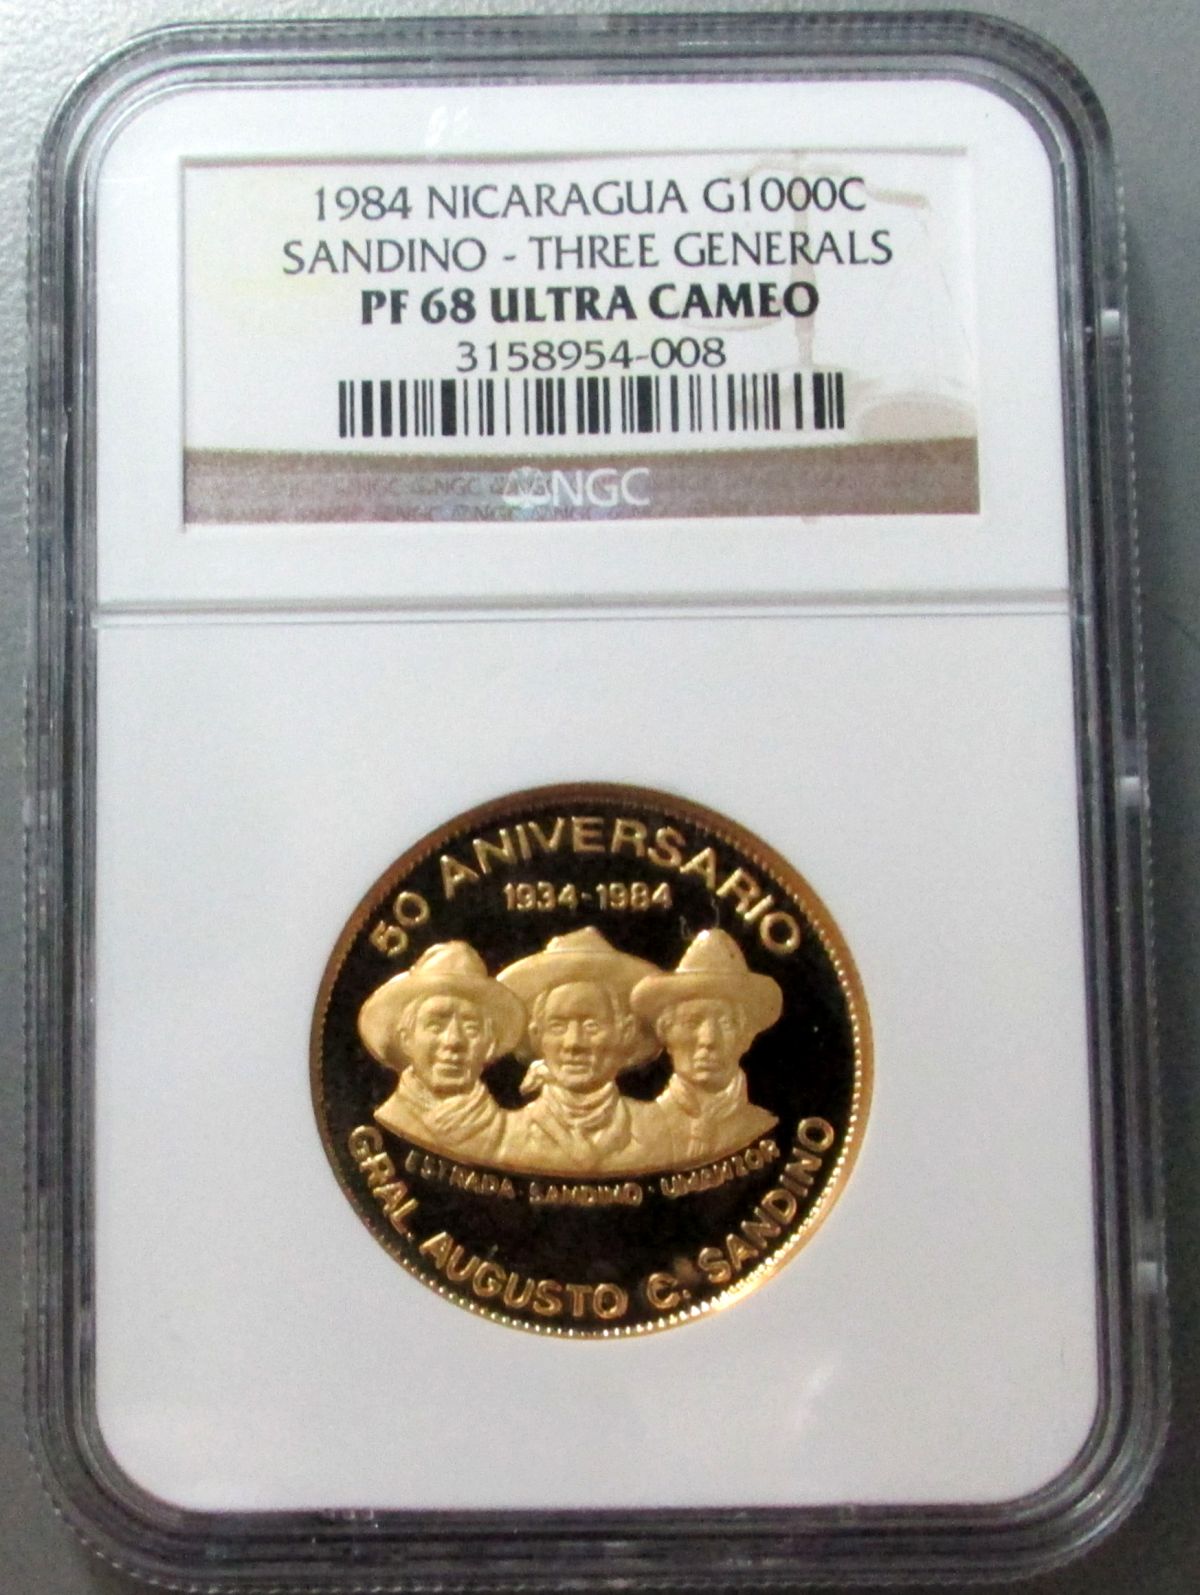 1984 GOLD NICARAGUA 1000 CORDOBAS THREE GENERALS NGC PROOF 68 ULTRA CAMEO ONLY 1,000 MINTED